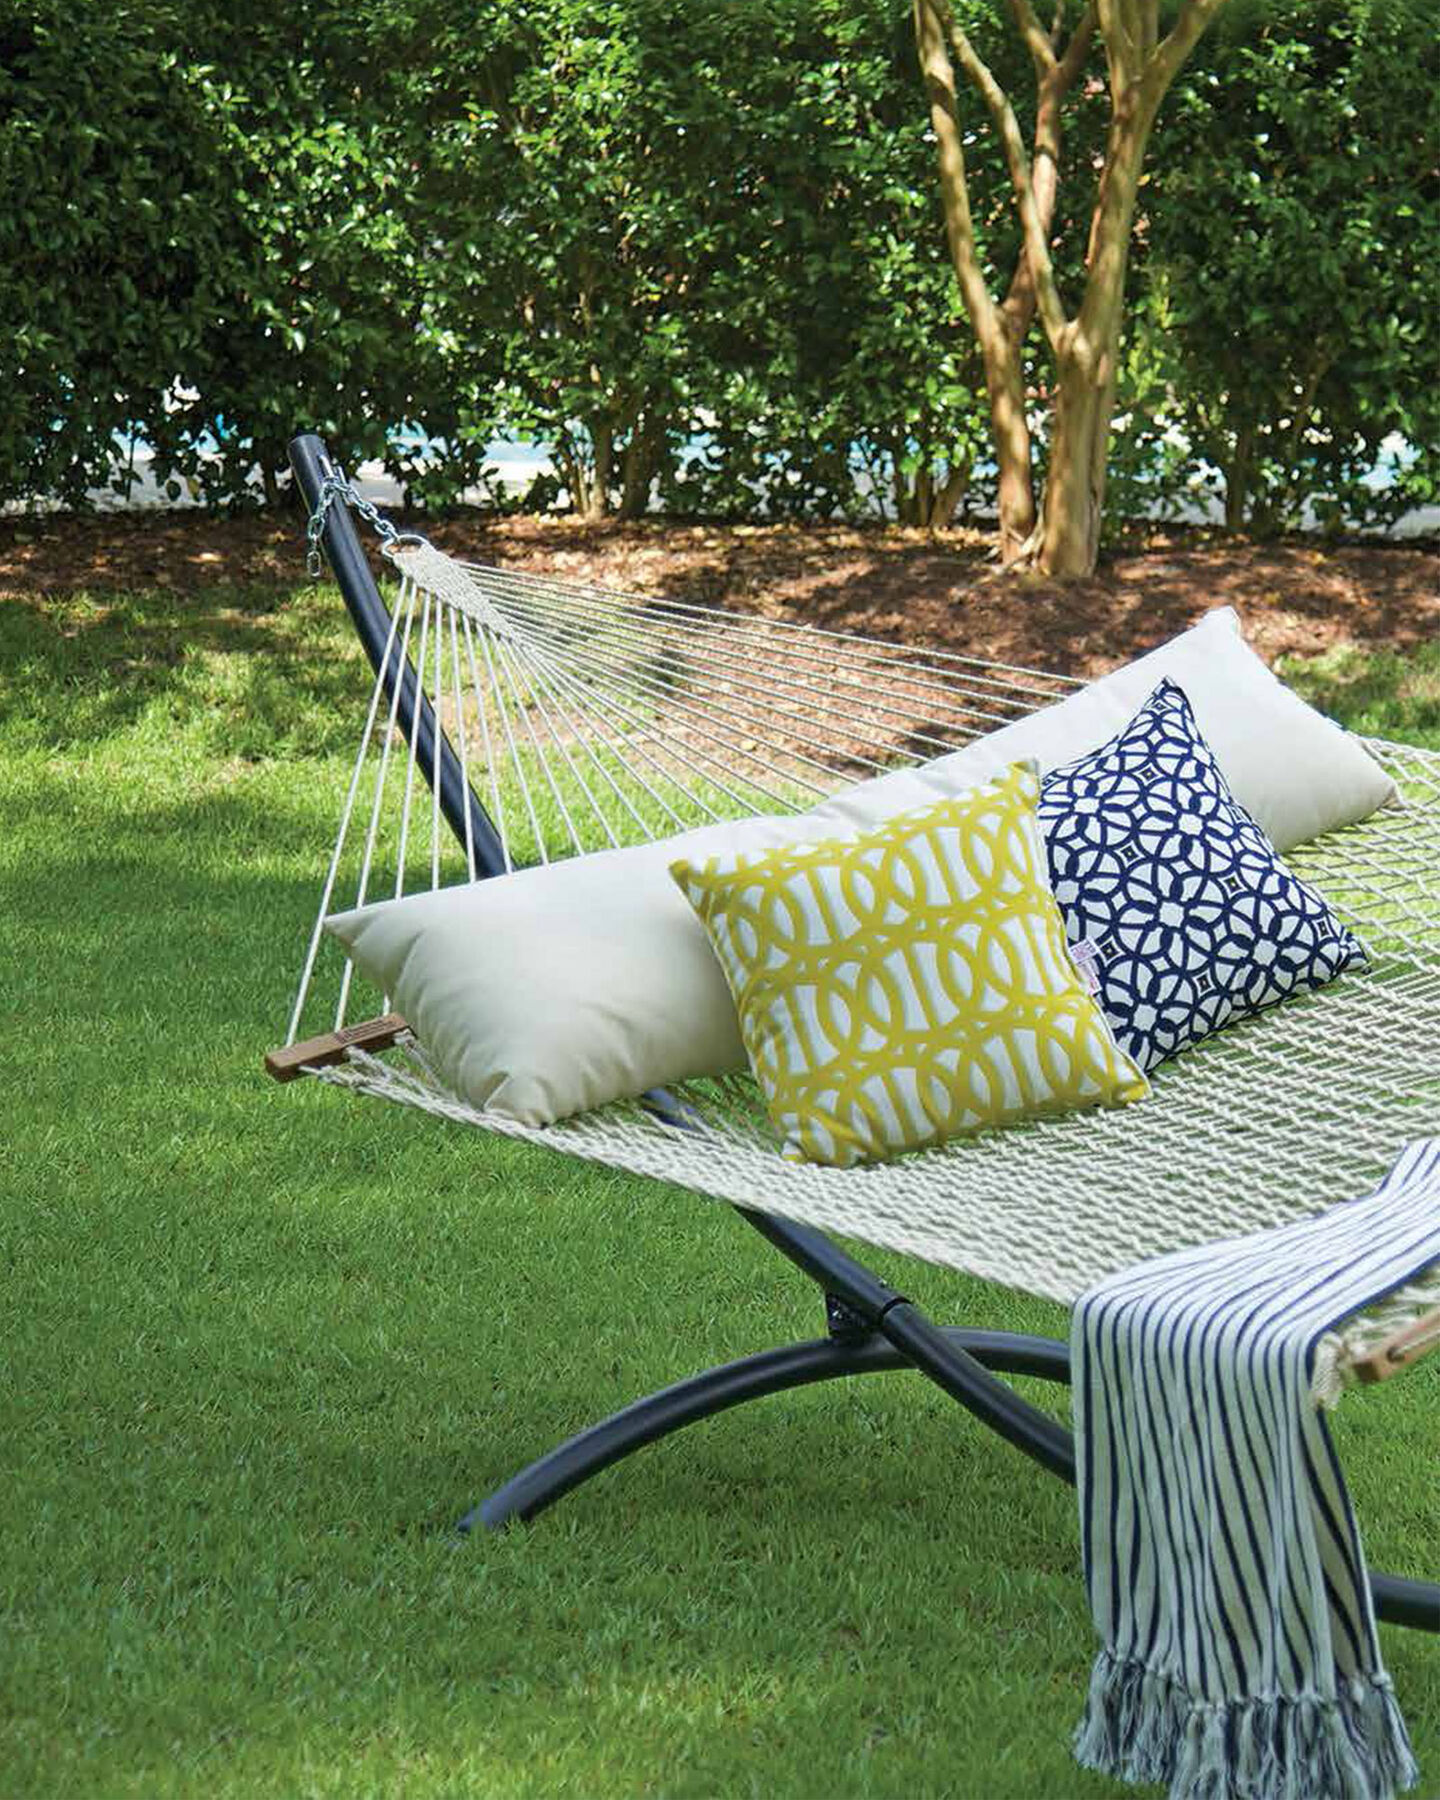 Woven hammock in the lawn under shade from surrounding trees